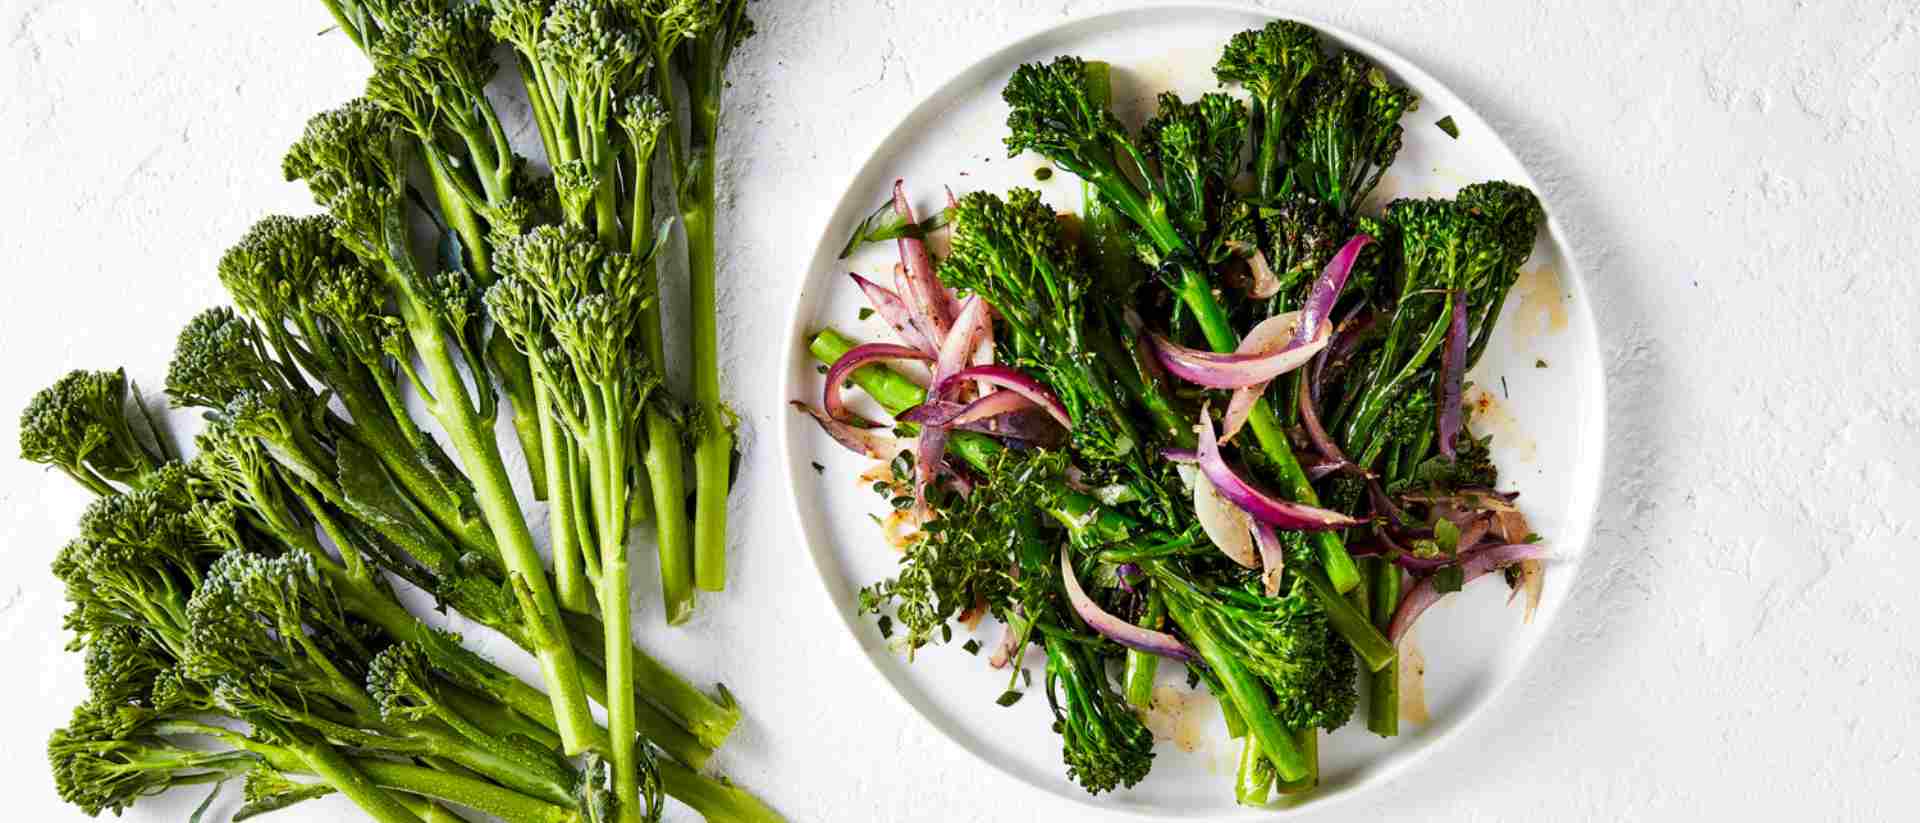 Sauteed Broccolini® with Herb Garlic Butter Recipe 